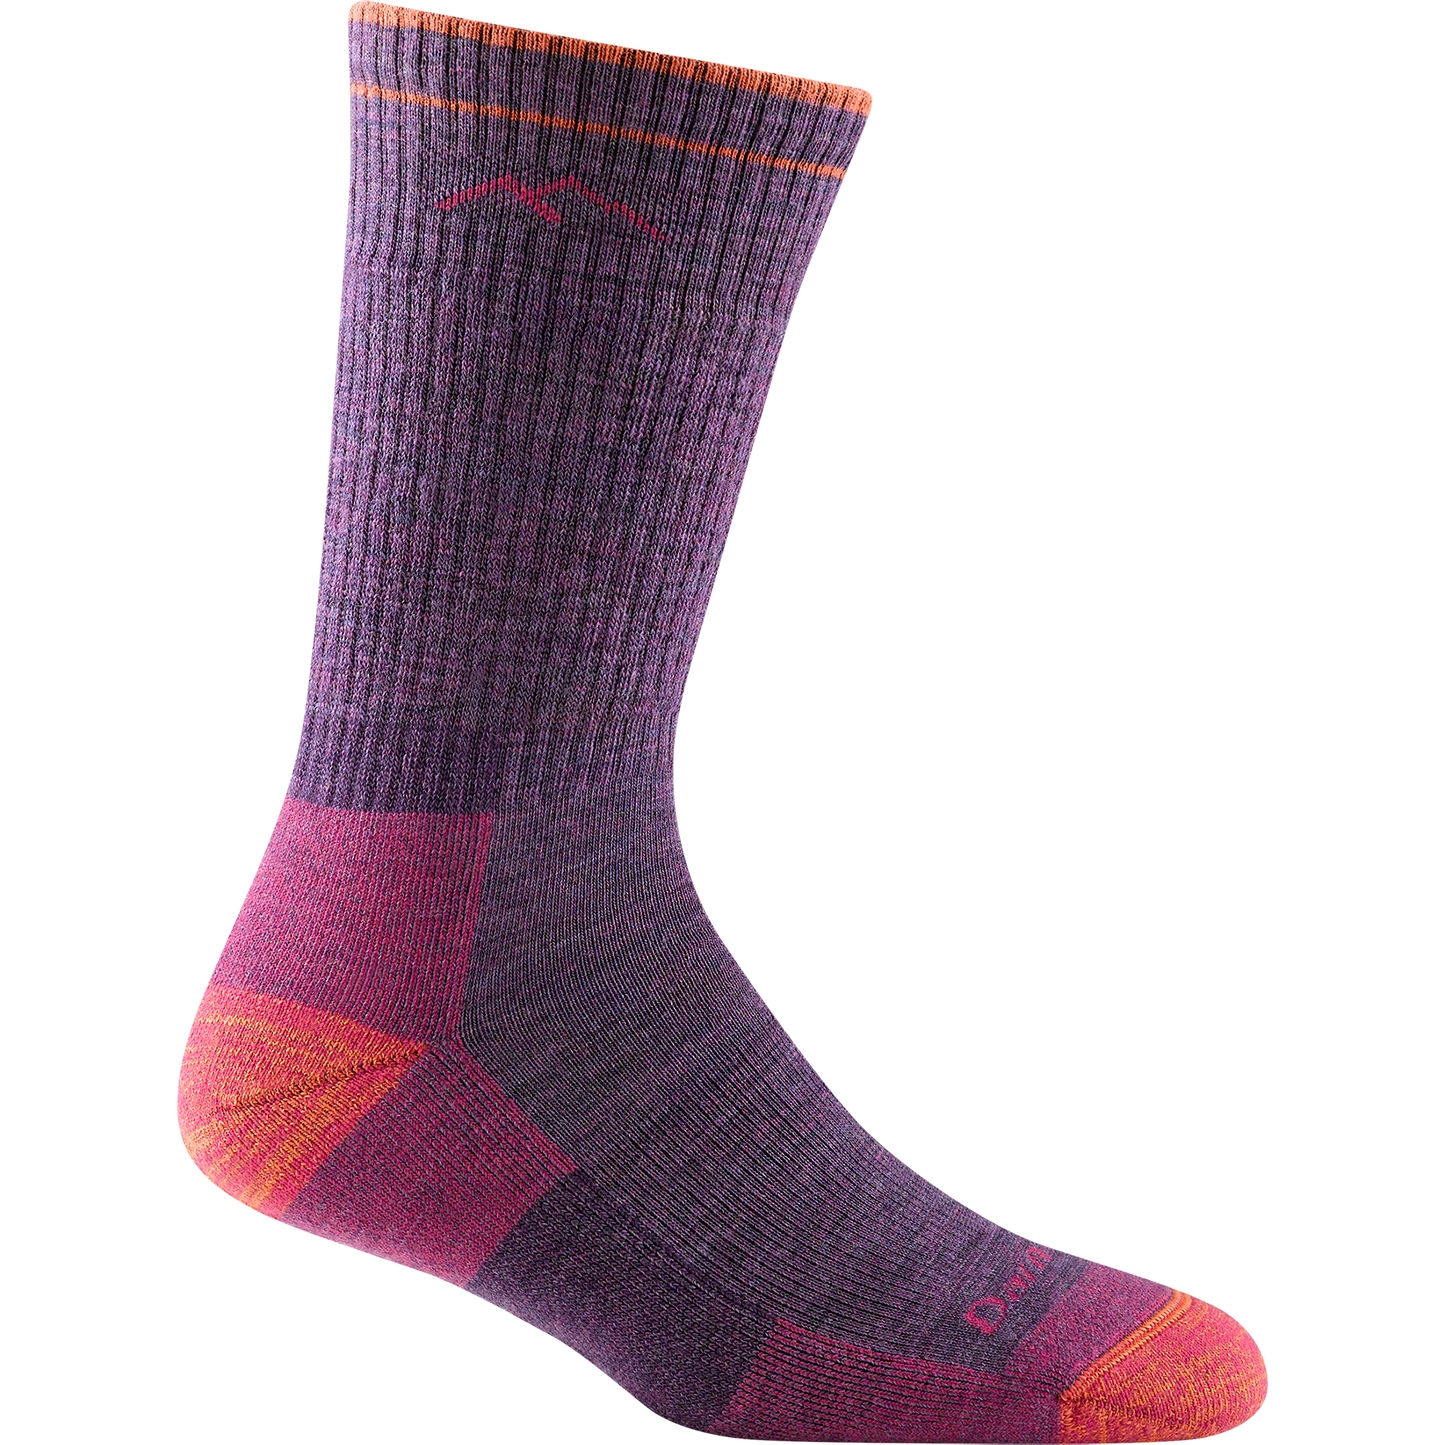 Darn tough plum sock with pink mountain outline detail, orange toe and heel